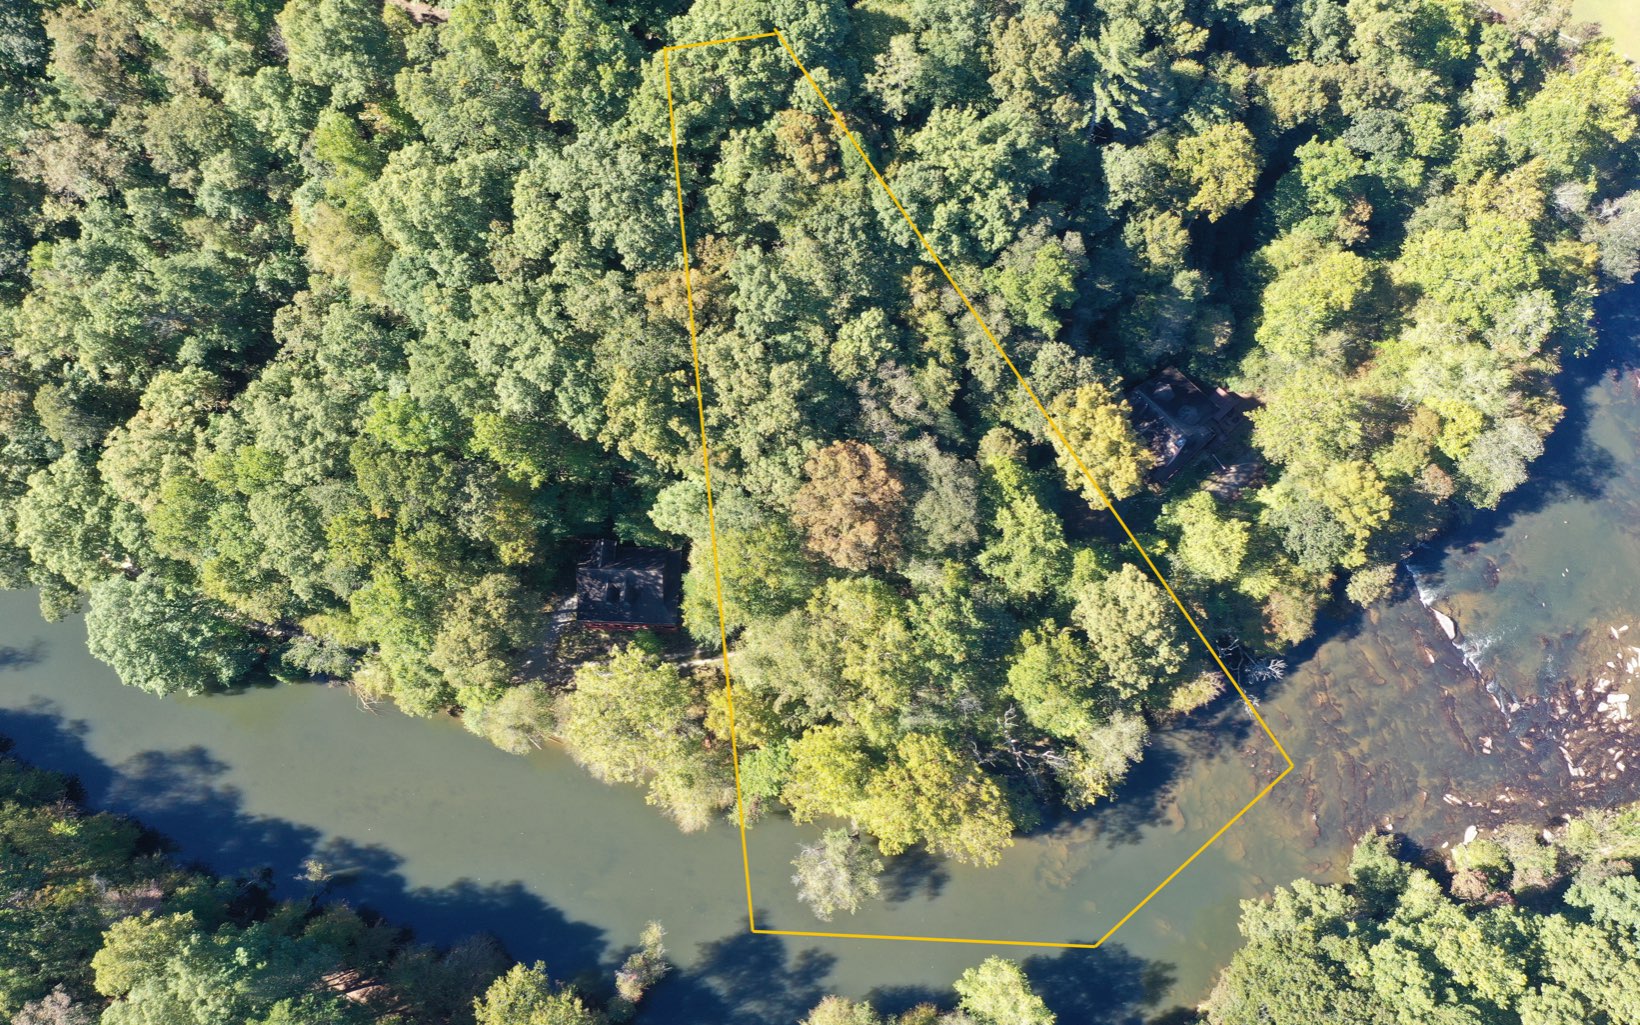 Rare Find! Priced $1,000 below appraisal value. Floor plans & septic already designed as seen in photos($3500 value) and ready to build! Please watch the video:Lush large level yard on the river, near rapids on the Coosawattee river on a private cul-de-sac road. Build your full-time home or investment property right in this vacation resort in the mountains. Site plans have already been made for an elevated piling home by the river. Subdivision allows for vacation rentals and has tennis courts, fishing pond, 5 Parks, 2 outdoor and 1 heated indoor pool, pickleball, 18-hole miniature golf, camping lots & RV lots by the river and pool, Basketball courts, etc. Close to wineries, apple orchards, hiking, kayaking tubing, etc. Wake up to deer roaming free in this protected wildlife subdivision. The mountain life awaits! Welcome to North Georgia, what are you waiting for?